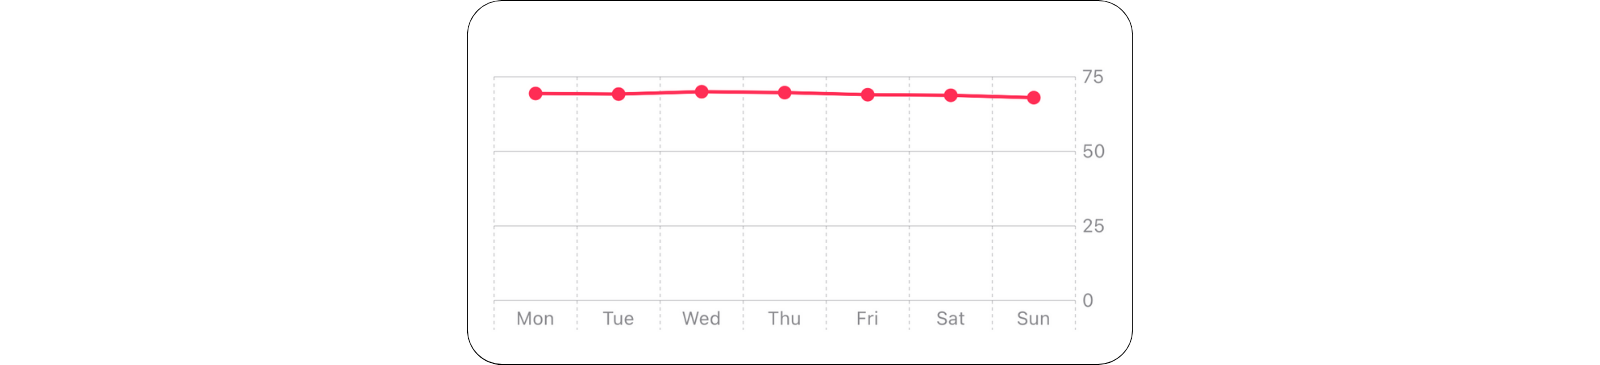 Line Chart showing weight data on the y-axis and days of the week on the x-axis